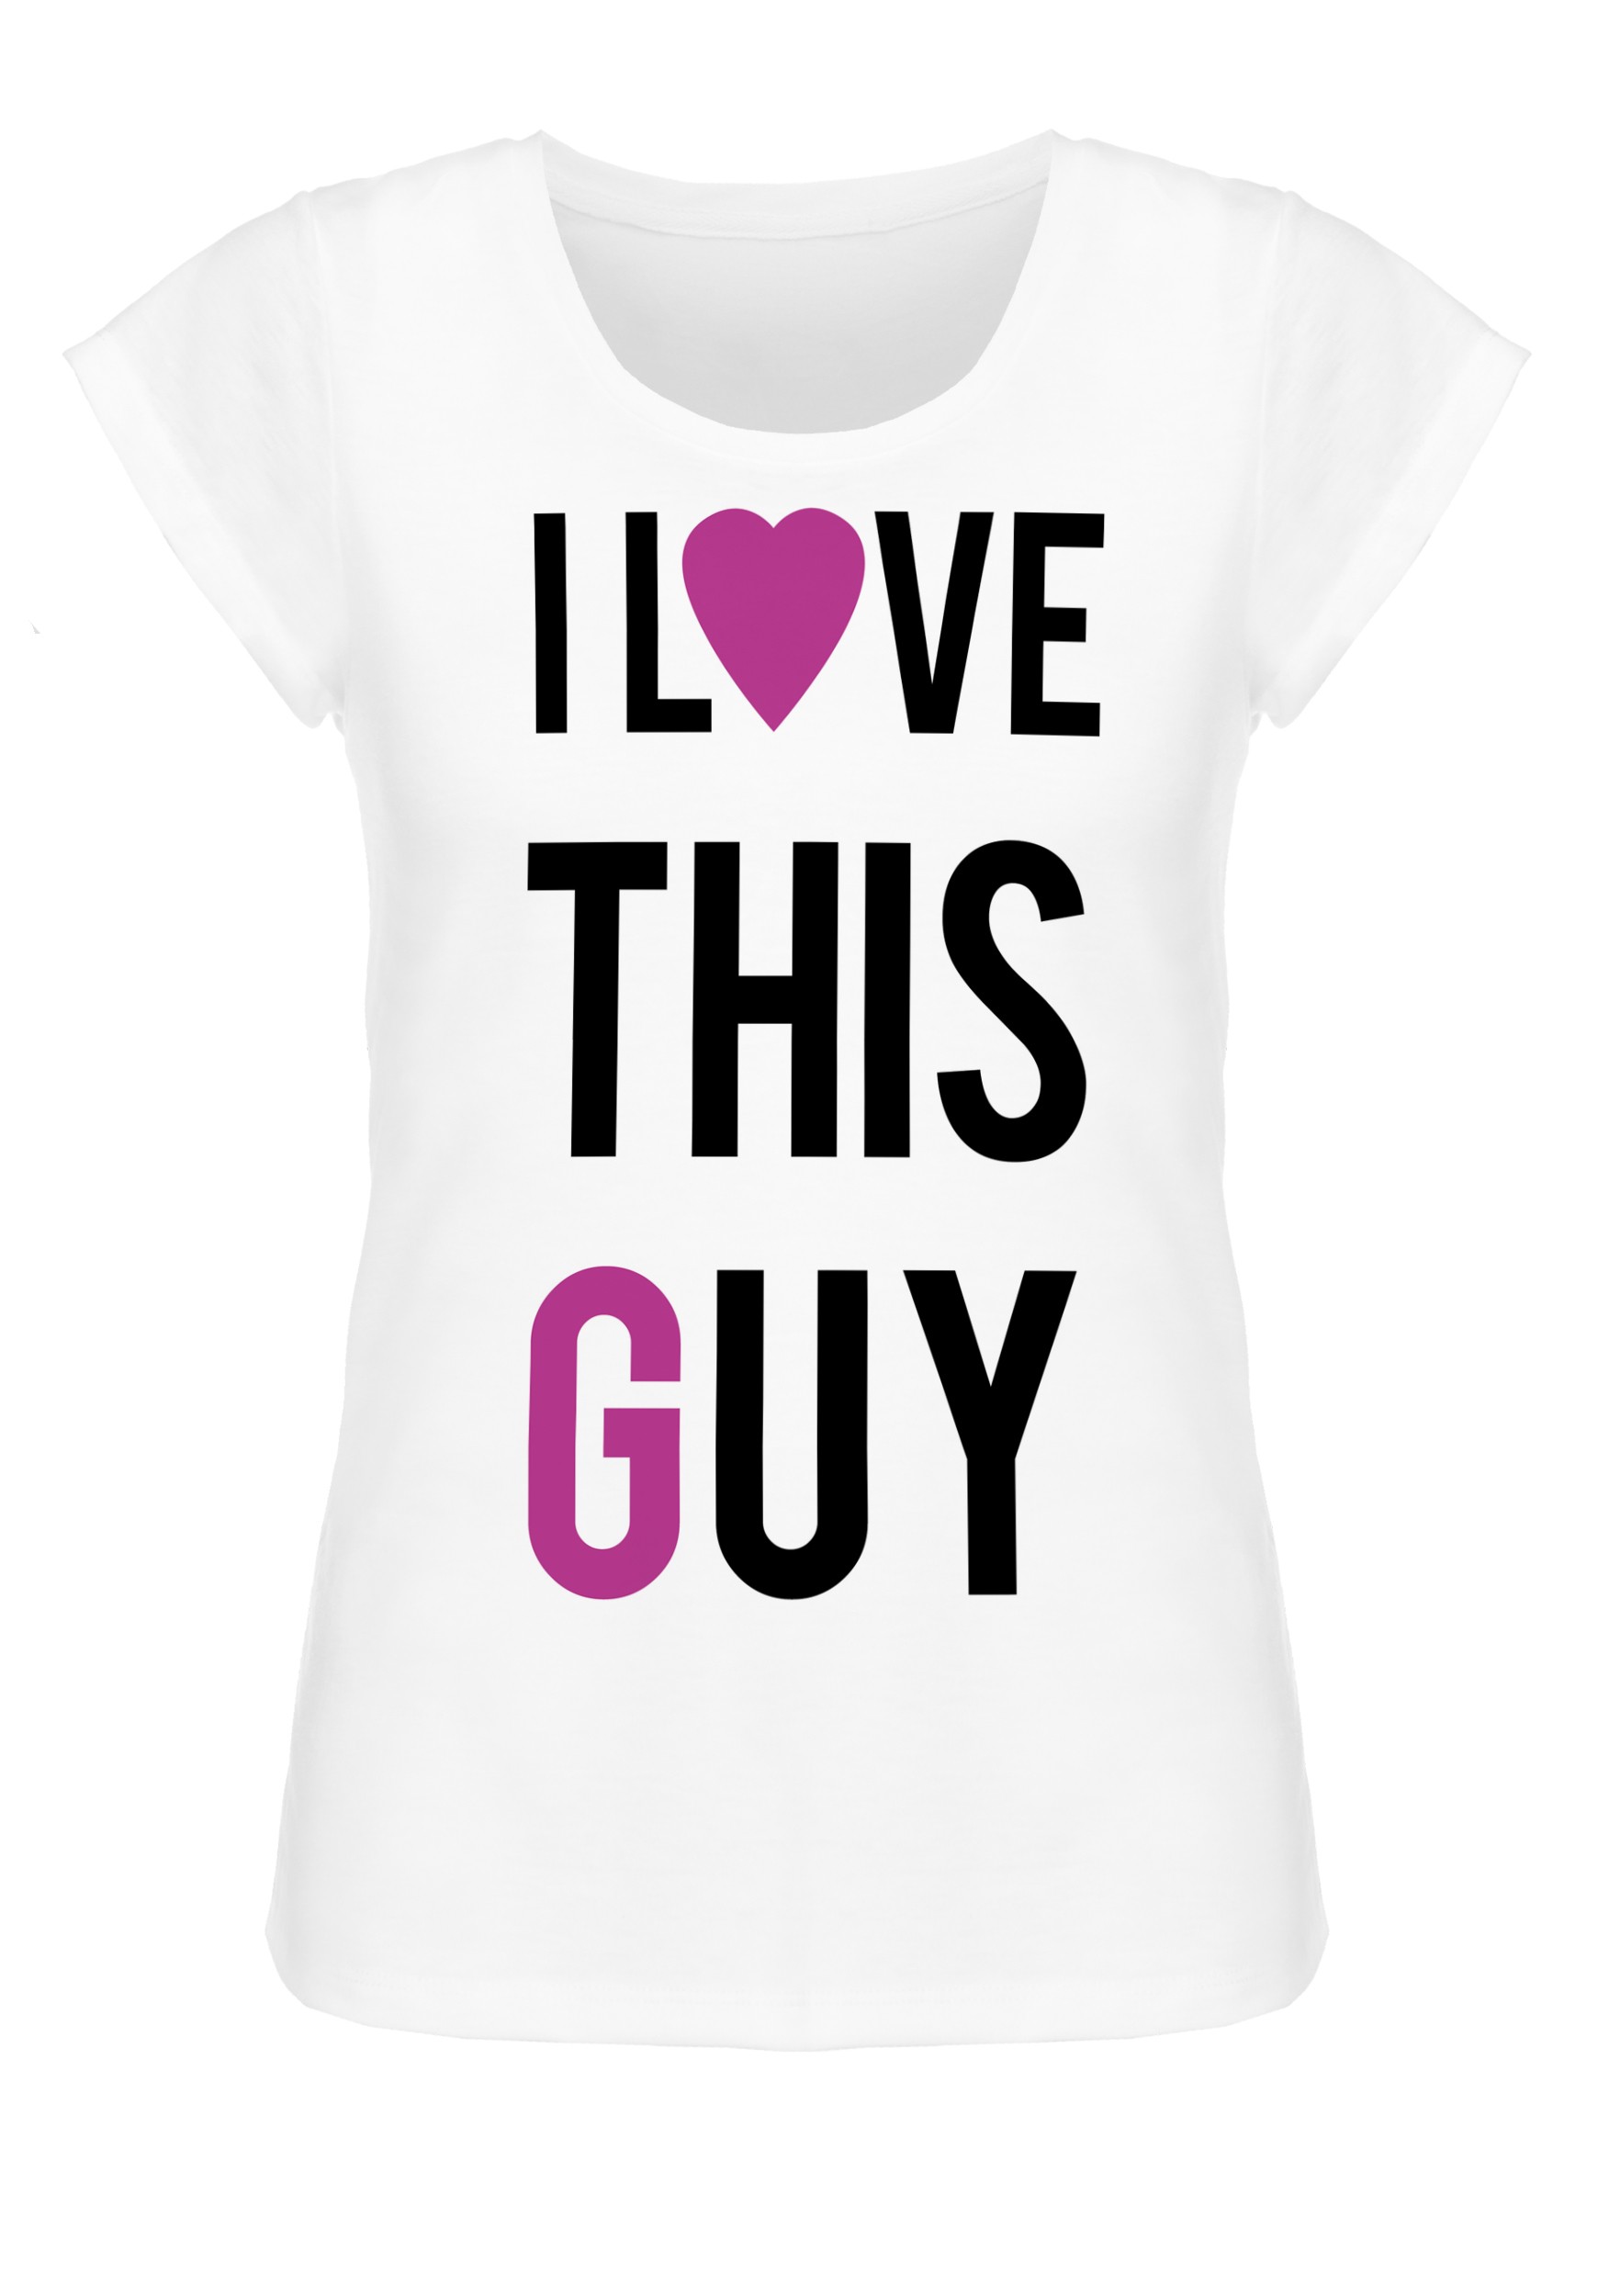 T-shirt woman LOVE THIS GAY  /biały/ (OUTLET)